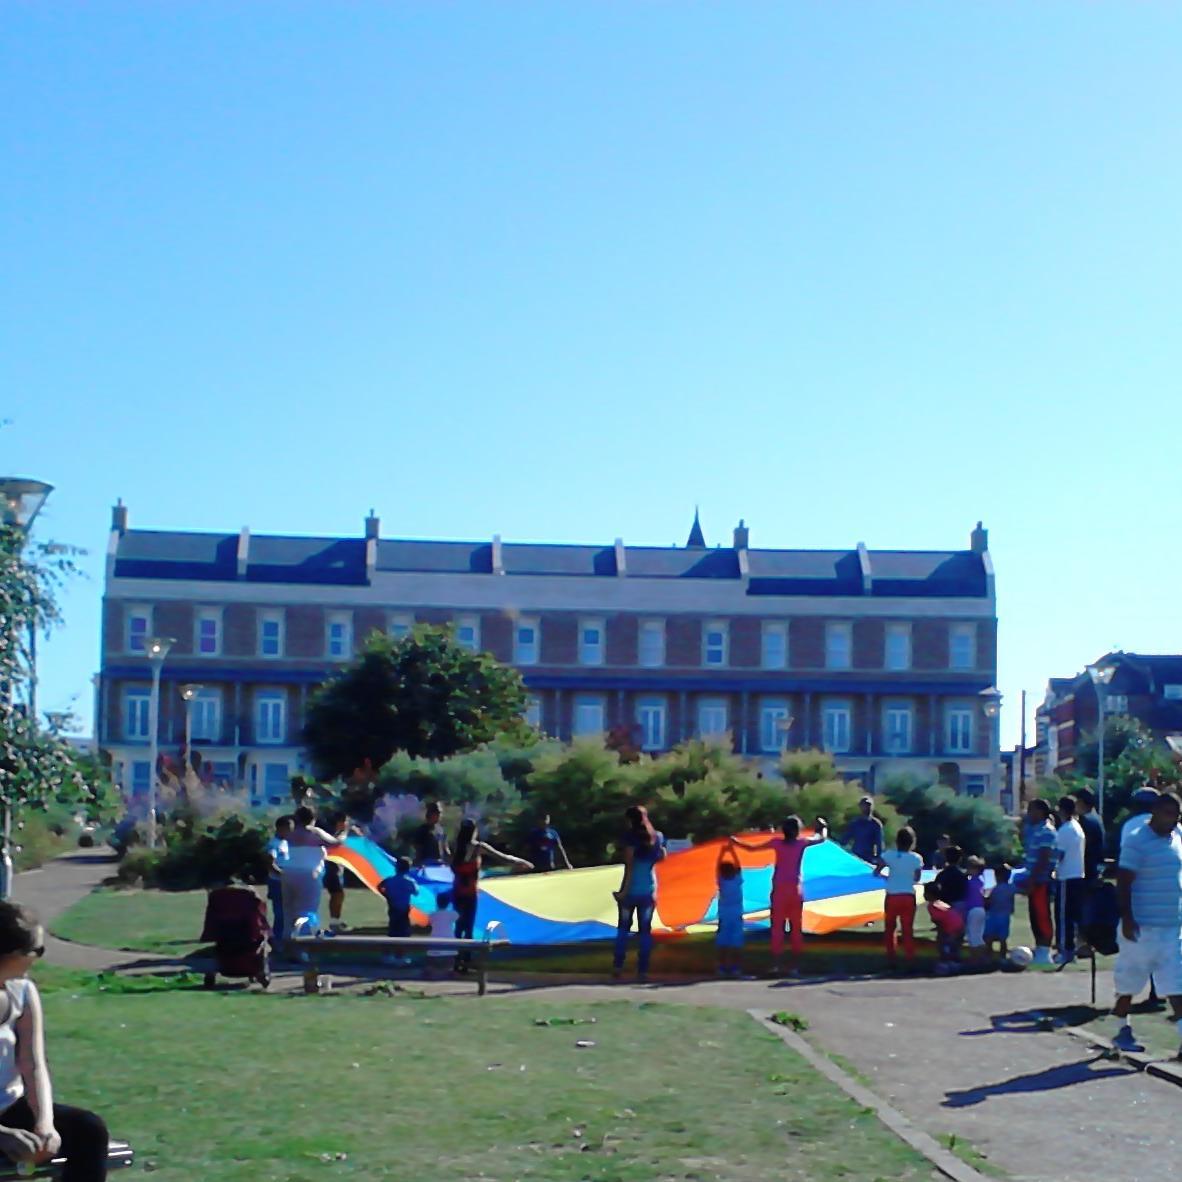 A community group in Margate that encourages community spirit and neighbourliness and looks after the Dalby Sq Gardens. We run community events in the Square.